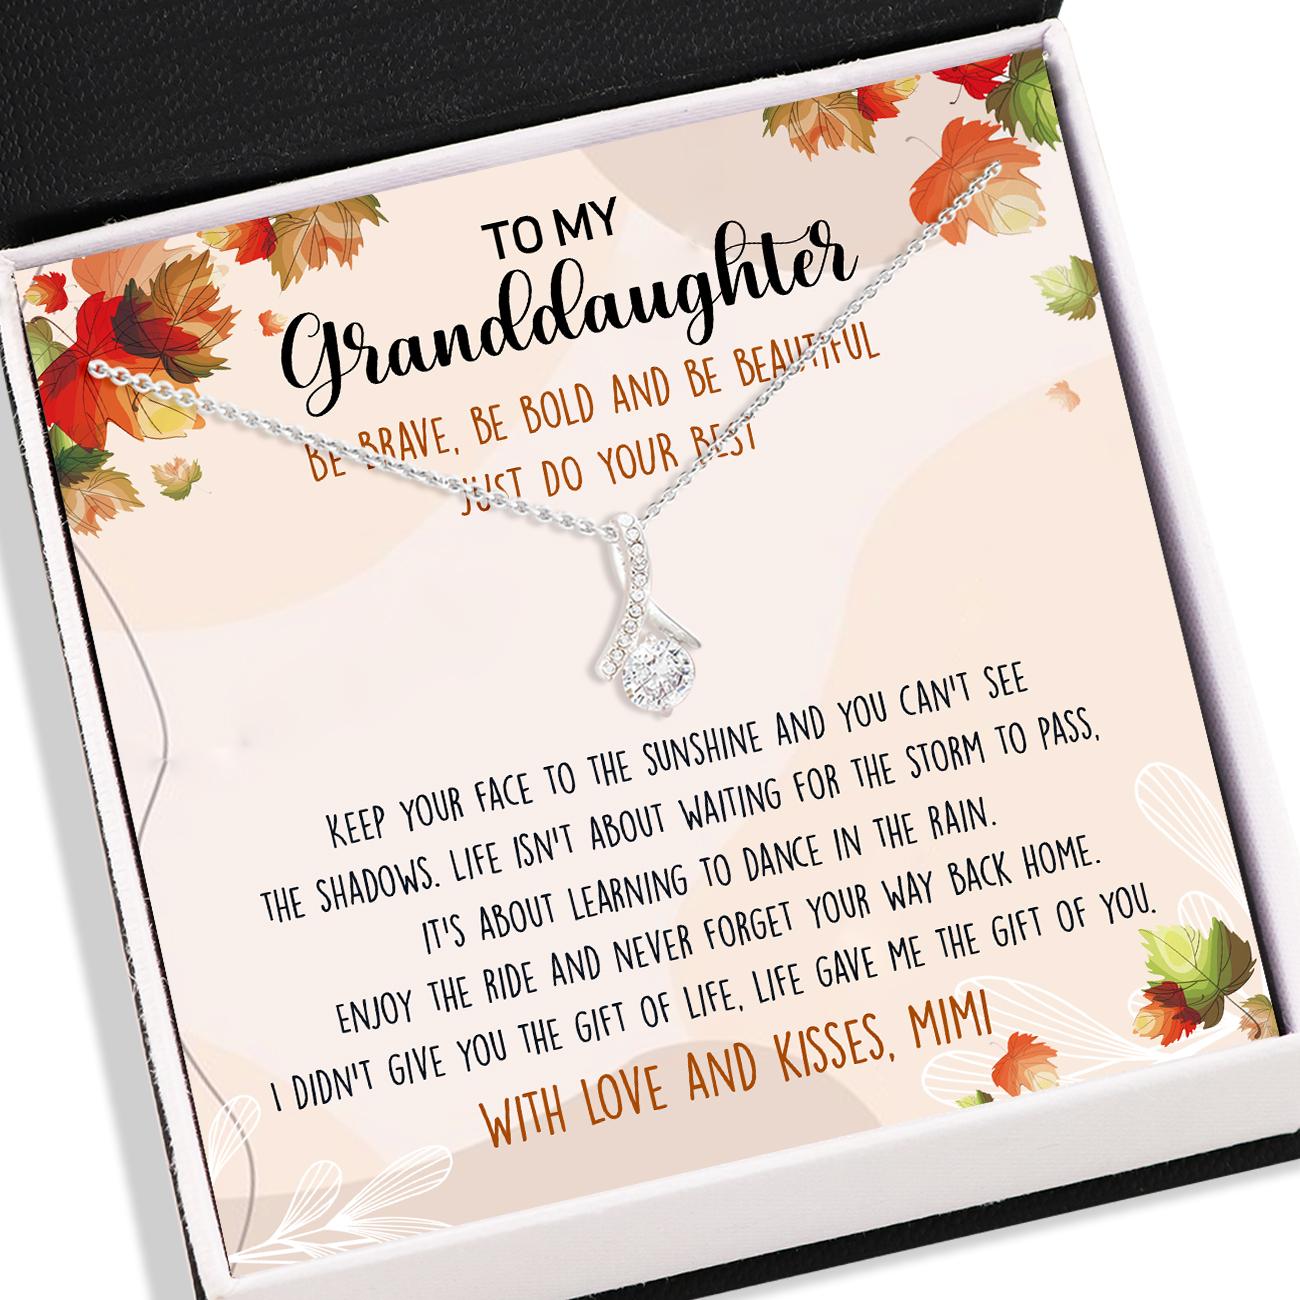 Granddaughter Necklace, To Granddaughter Gift From Mimi Necklace Card Message - Alluring Beauty Necklace